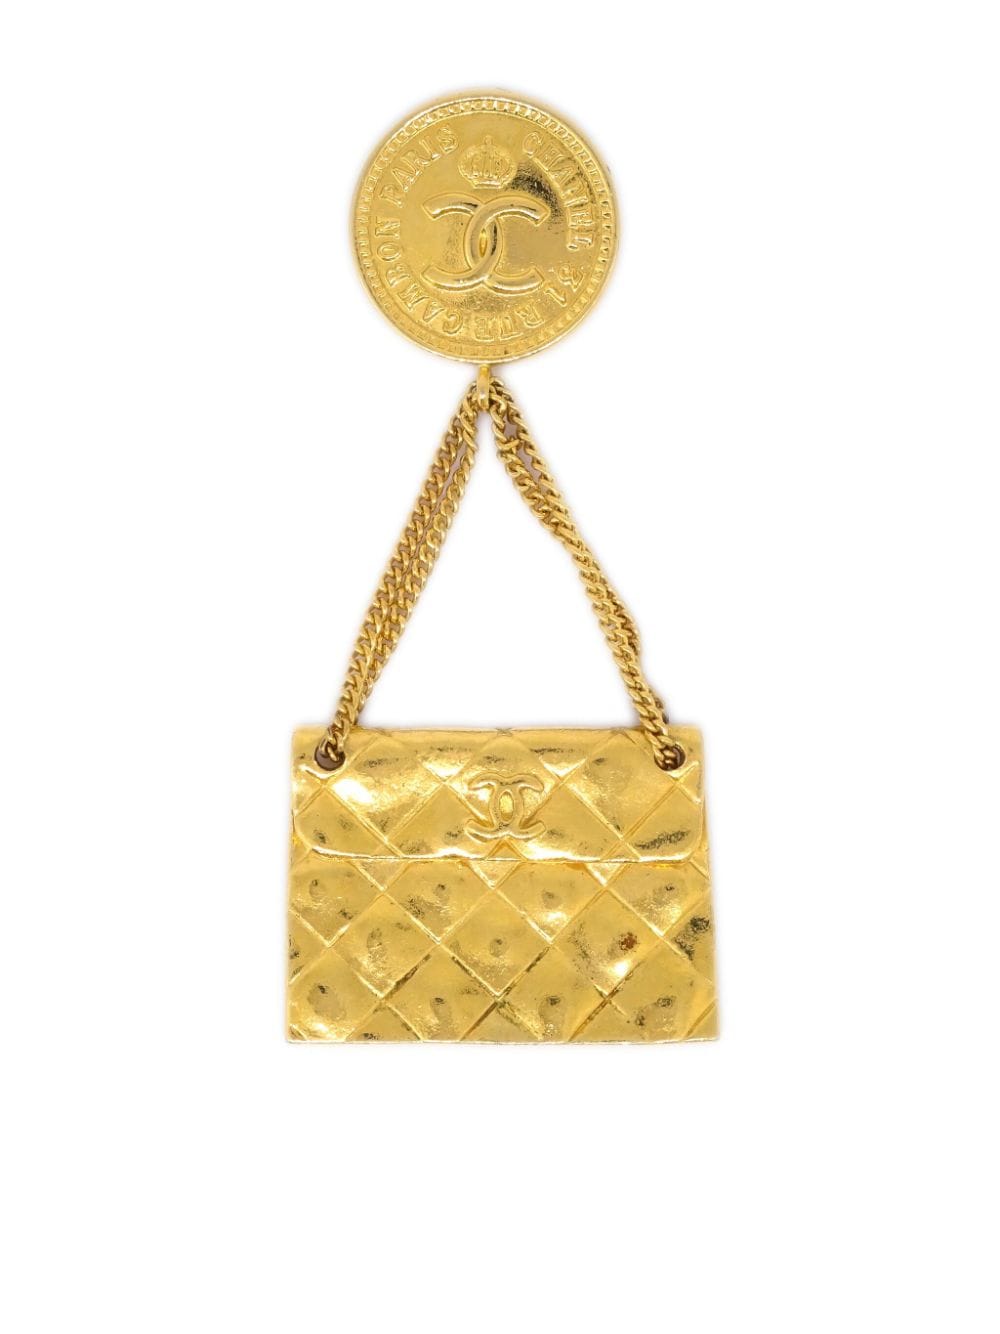 Pre-owned Chanel 1990 Classic Flap Bag Brooch In Gold